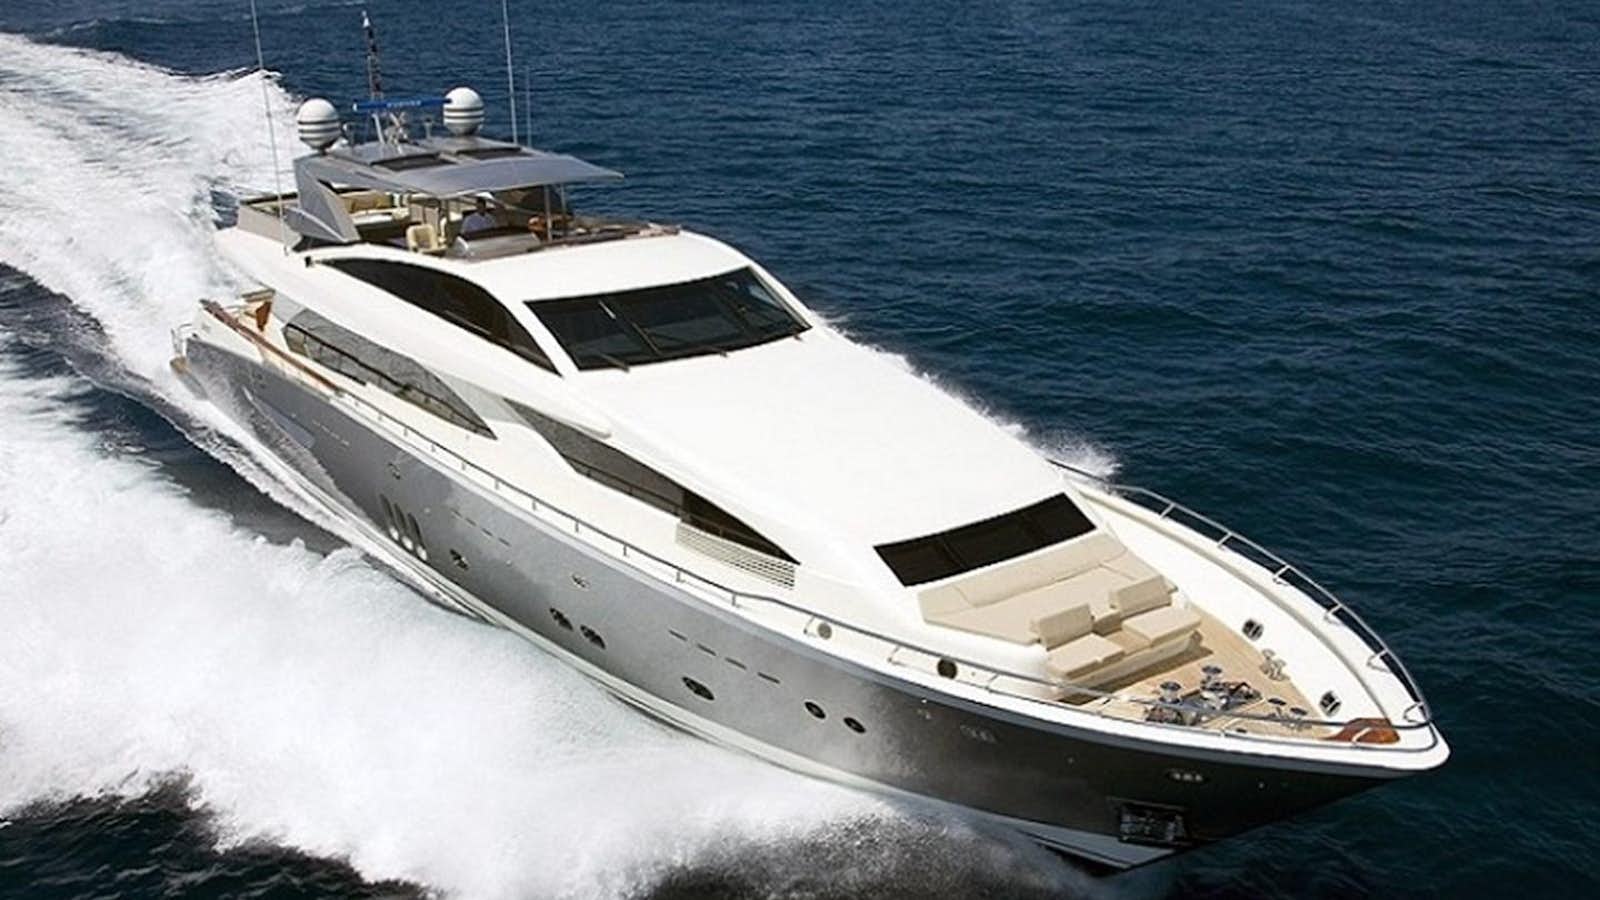 Watch Video for APMONIA Yacht for Charter